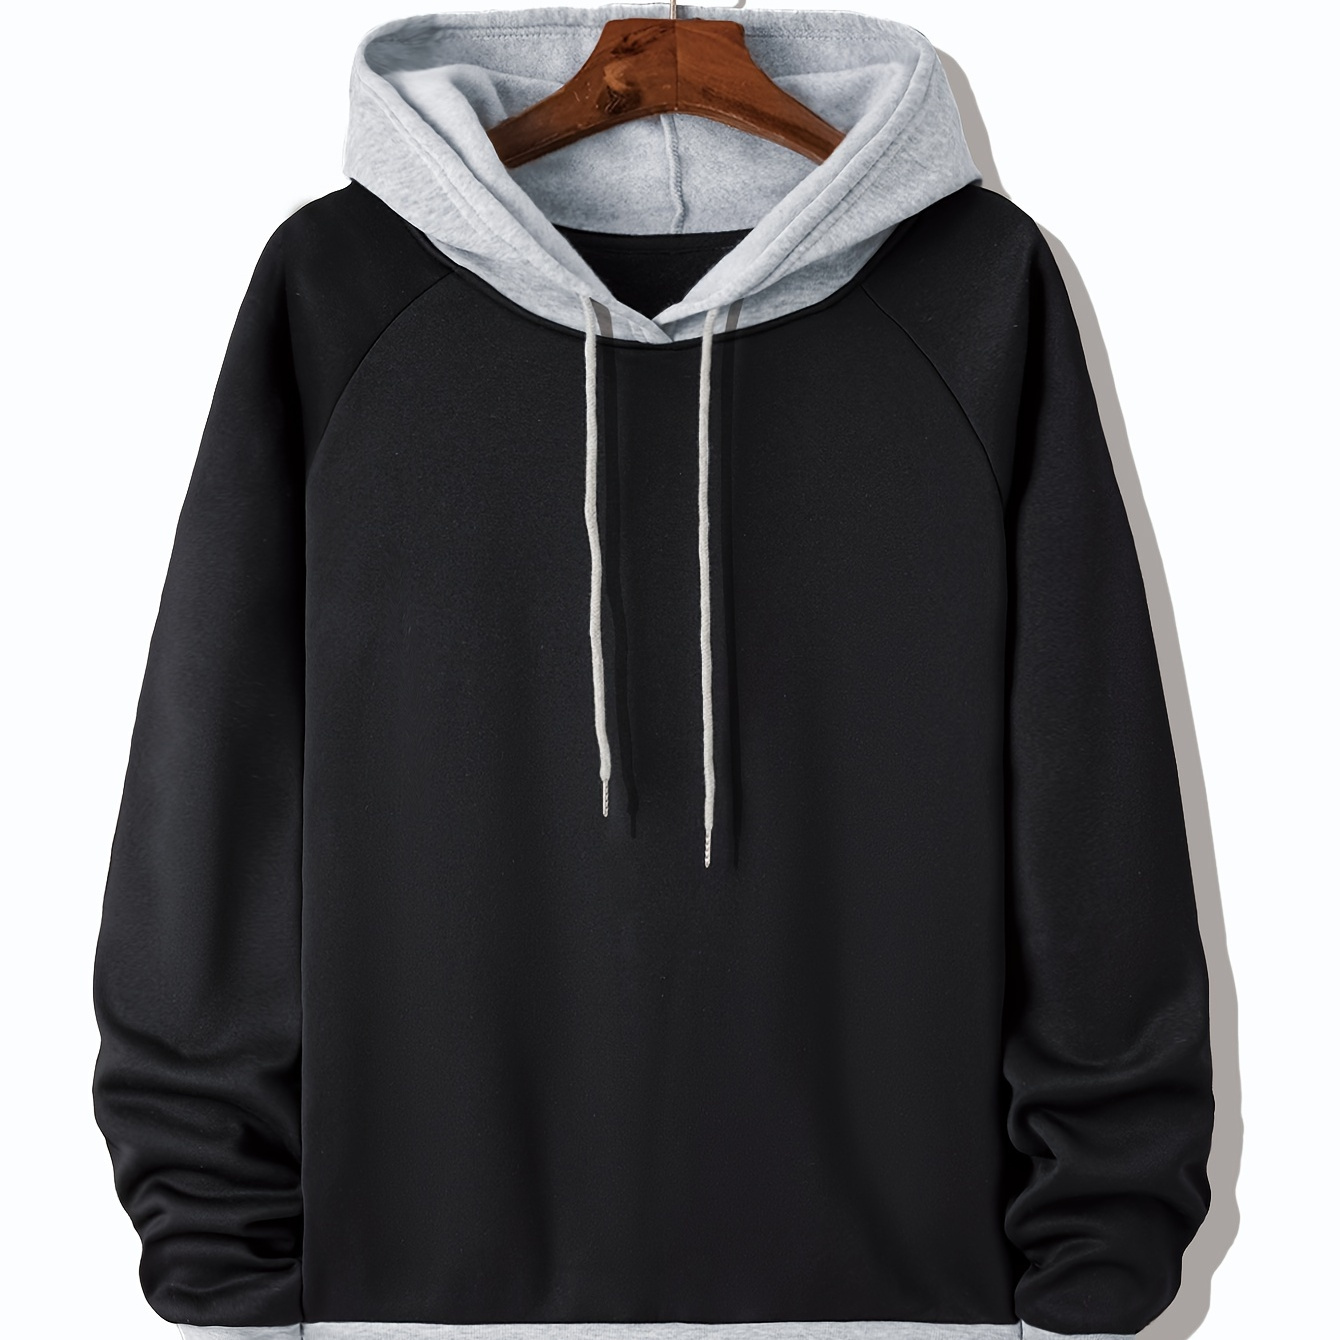 

Plus Size Men's Contrast Color Hooded Sweatshirt For Spring Fall Winter, Men's Clothing